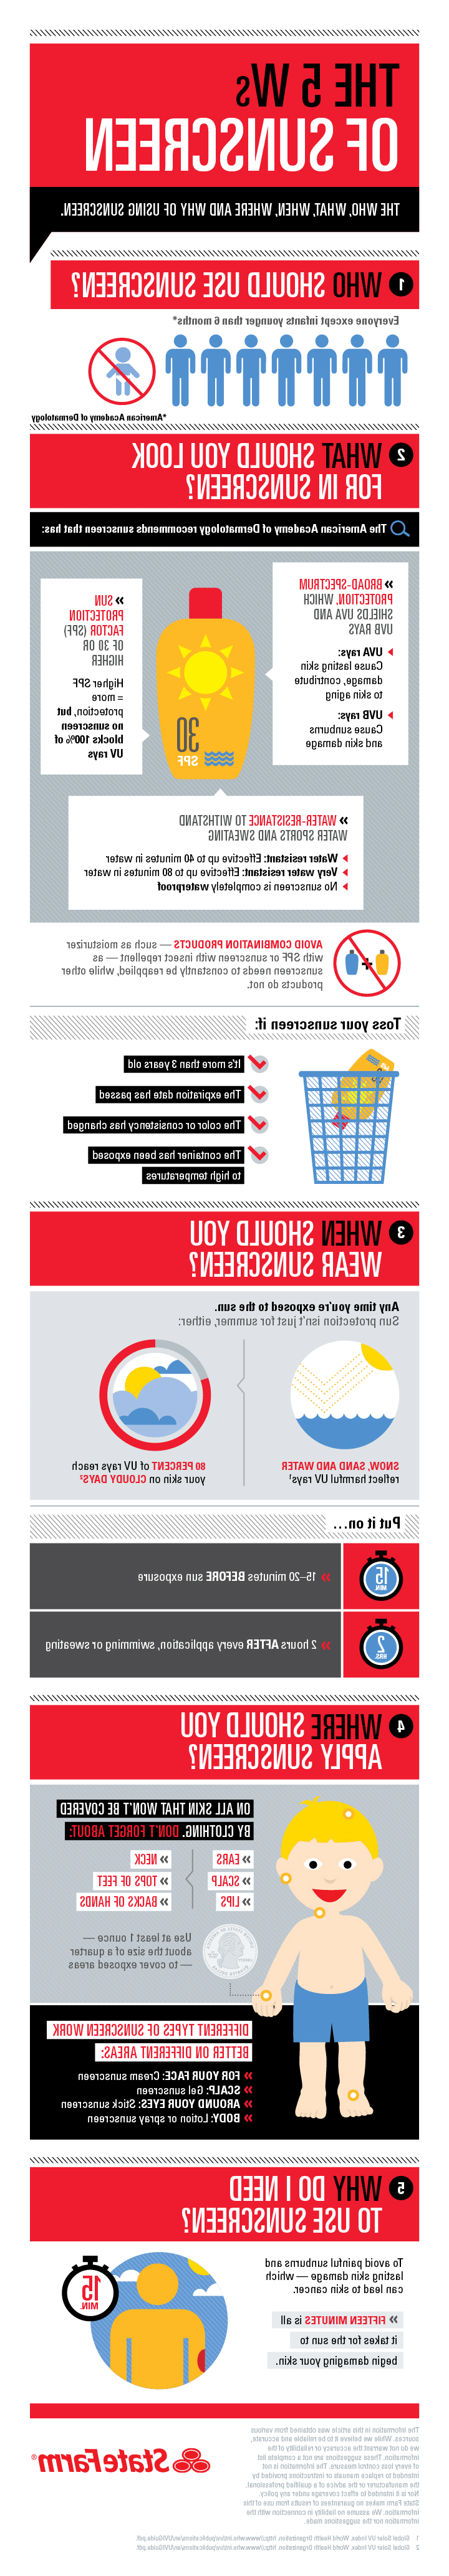 688-infographic-5-ws-of-sunscreen